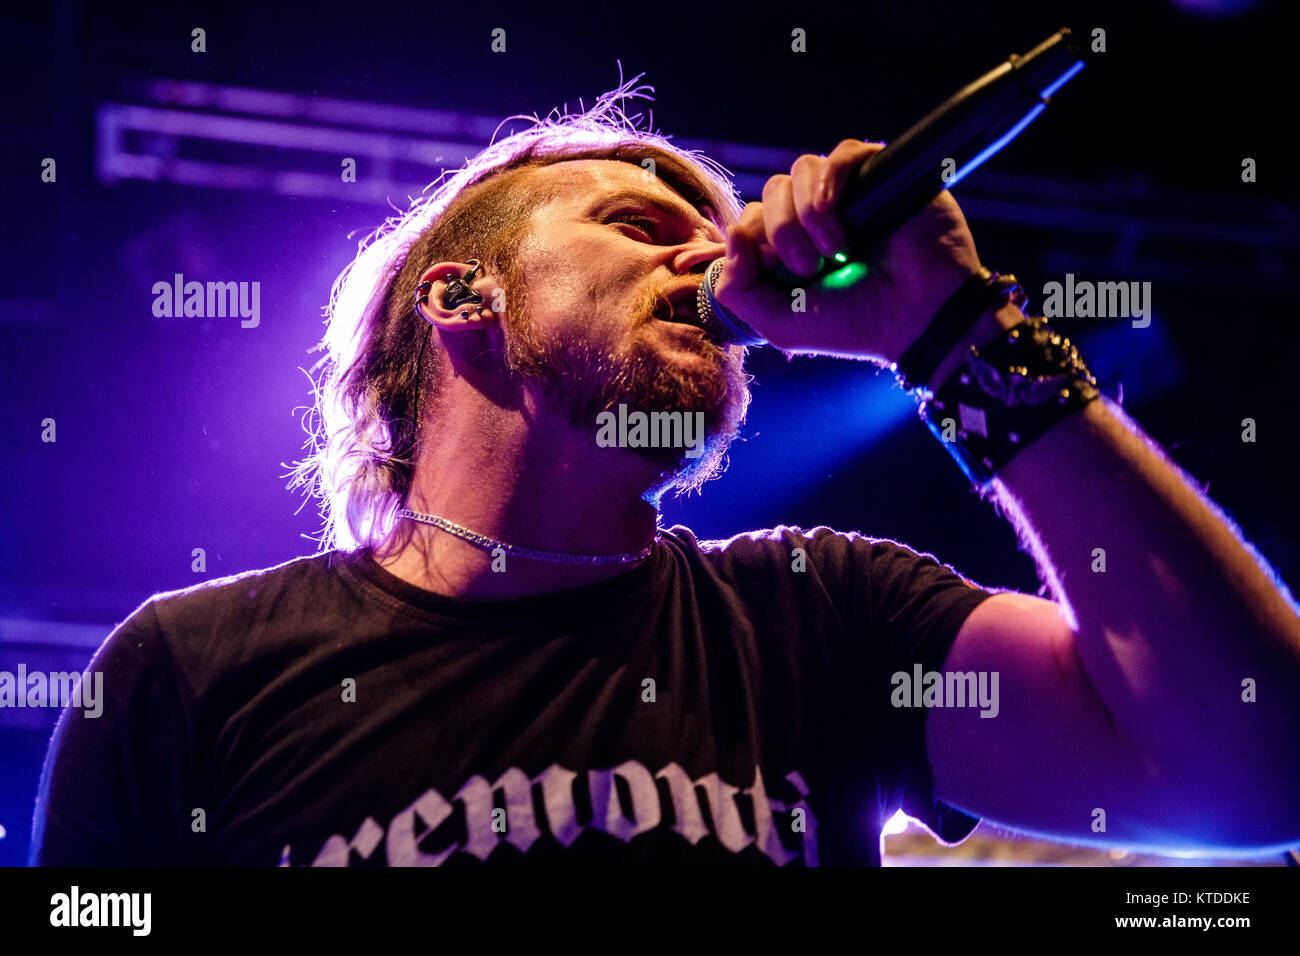 The American metalcore band The Raven Age performs a live concert at Amager Bio in Copenhagen. Here vocalist Michael Burrough is seen live on stage. Denmark, 06/03 2017. Stock Photo